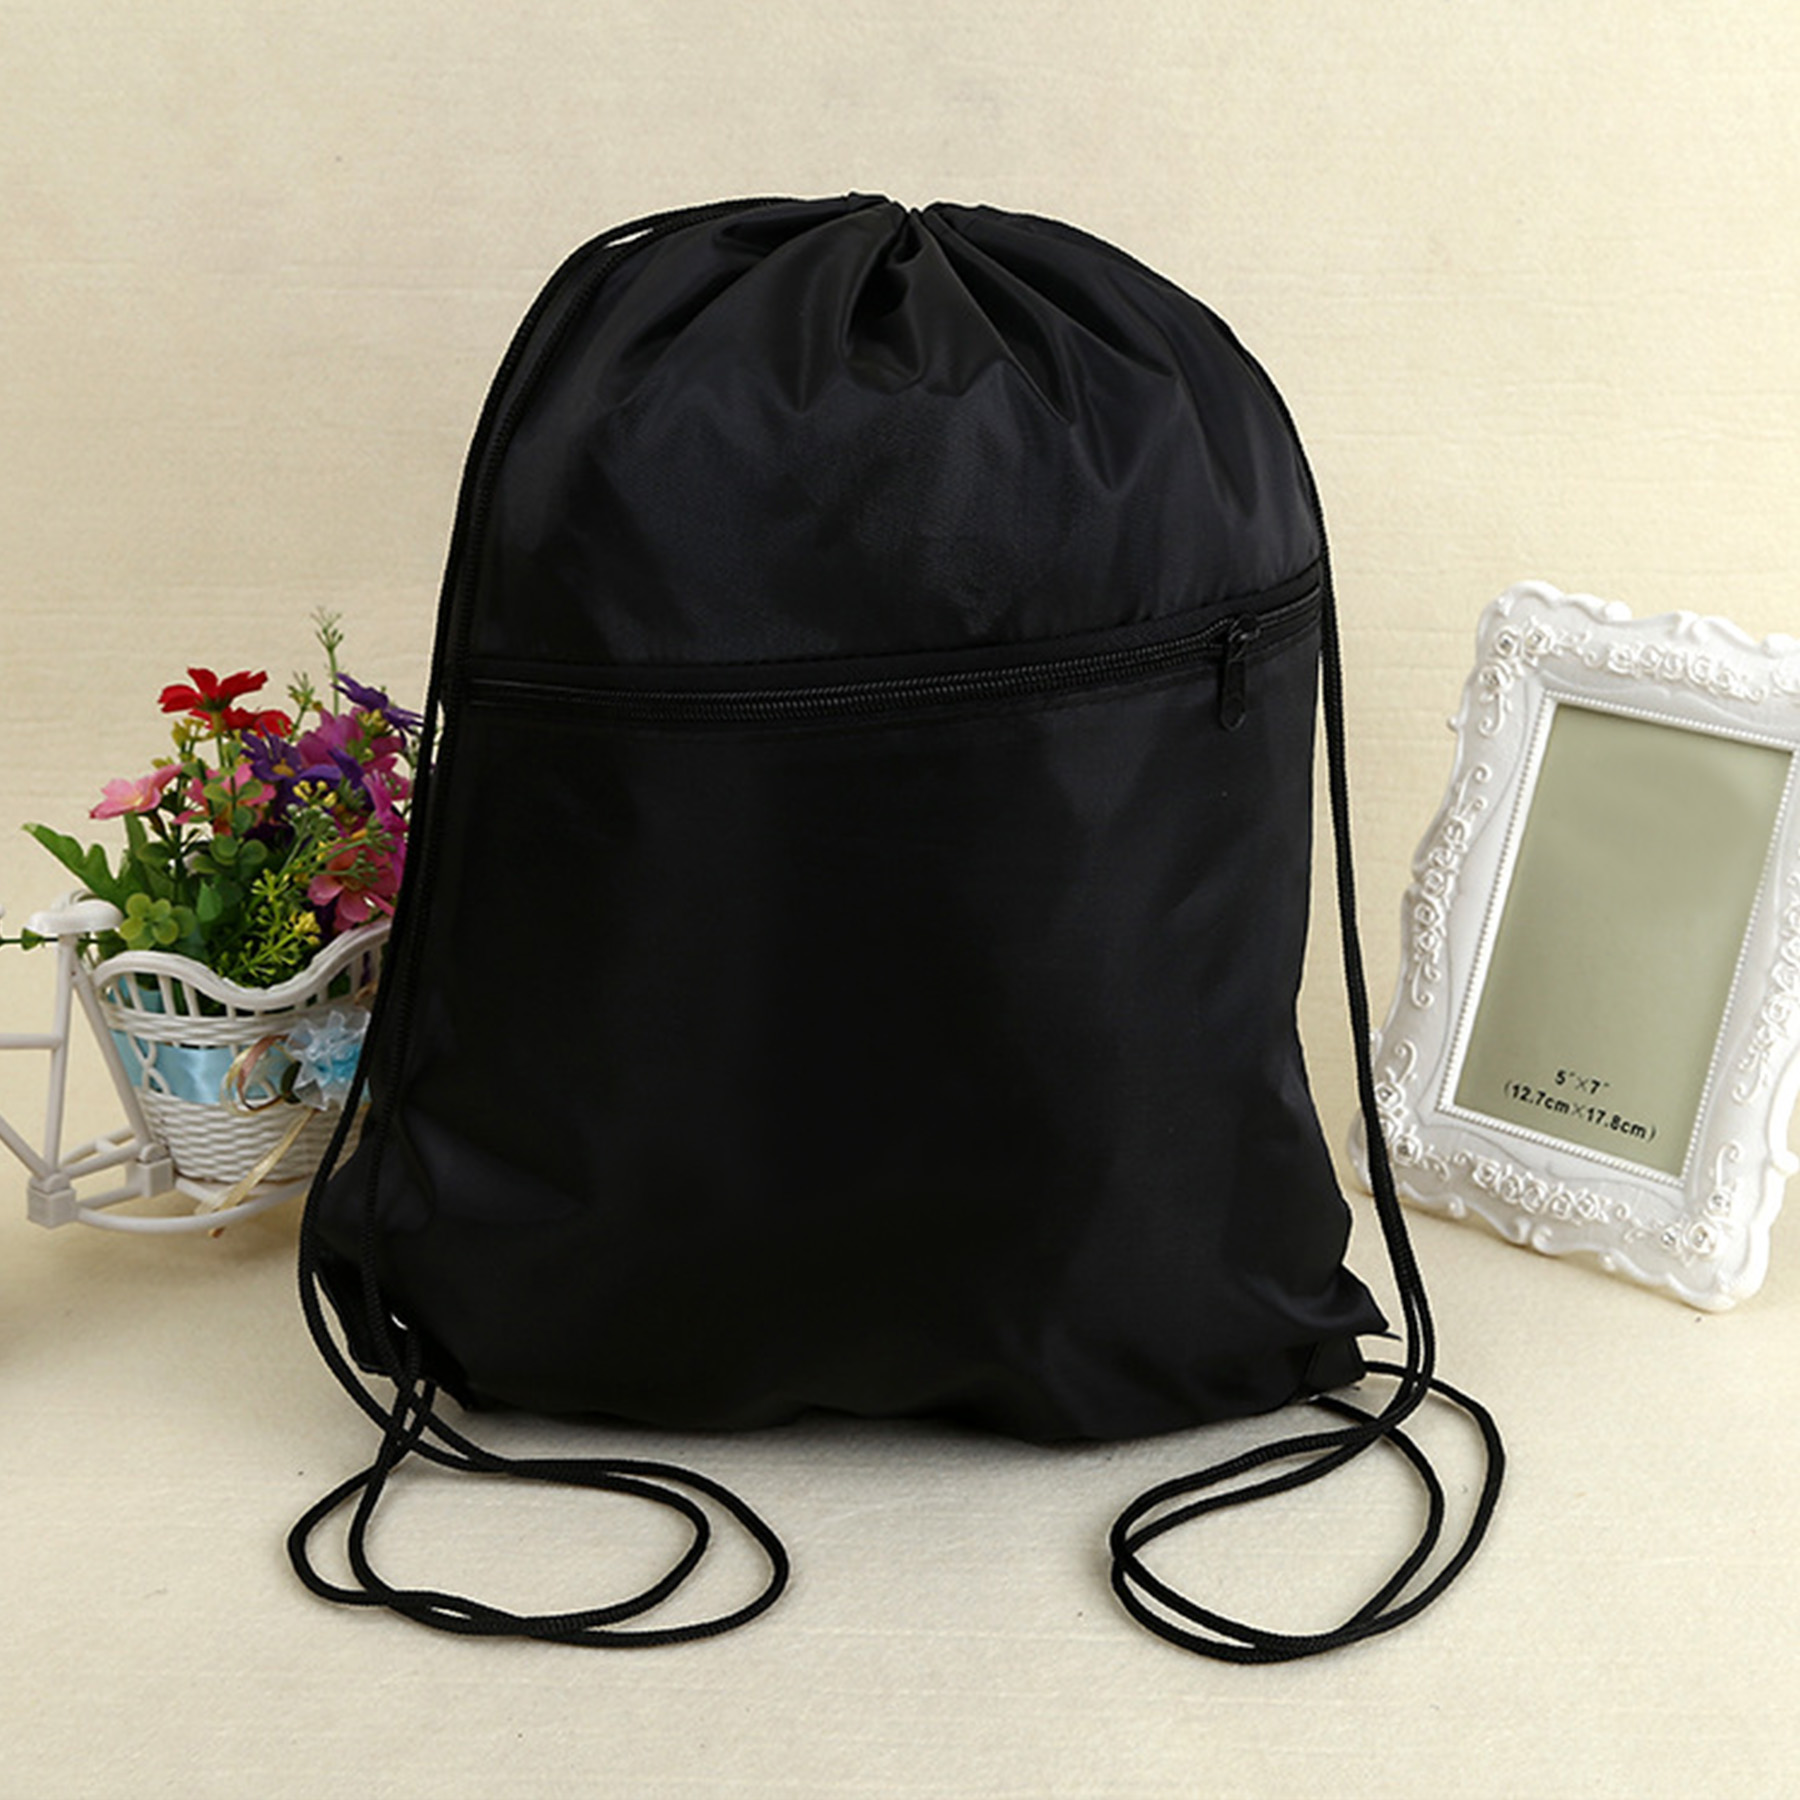 CSJW8039 210D PU Coating Waterproof Drawstring Bags With Front Zipper